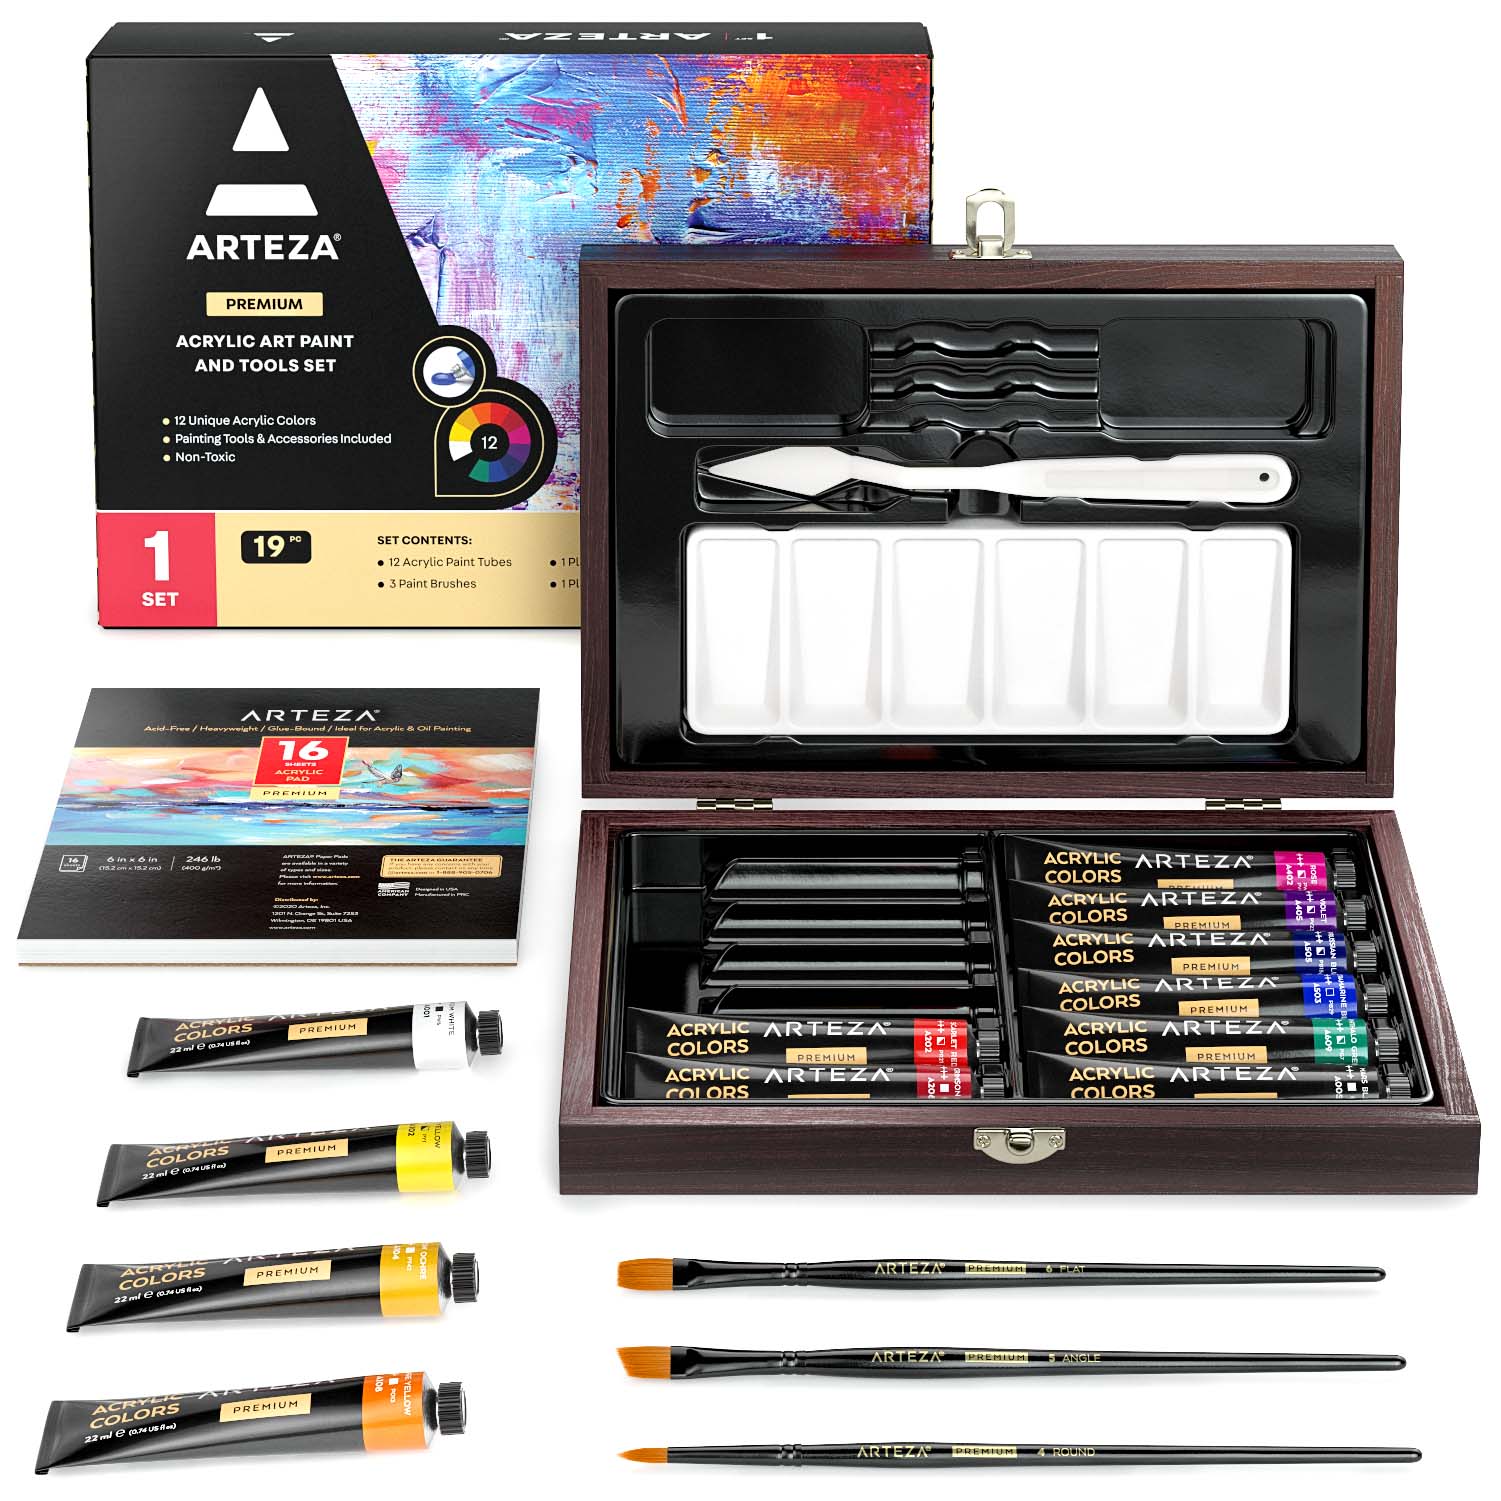 Castle Arts 40 Piece Drawing and Sketching Graphite Pencil Art Set